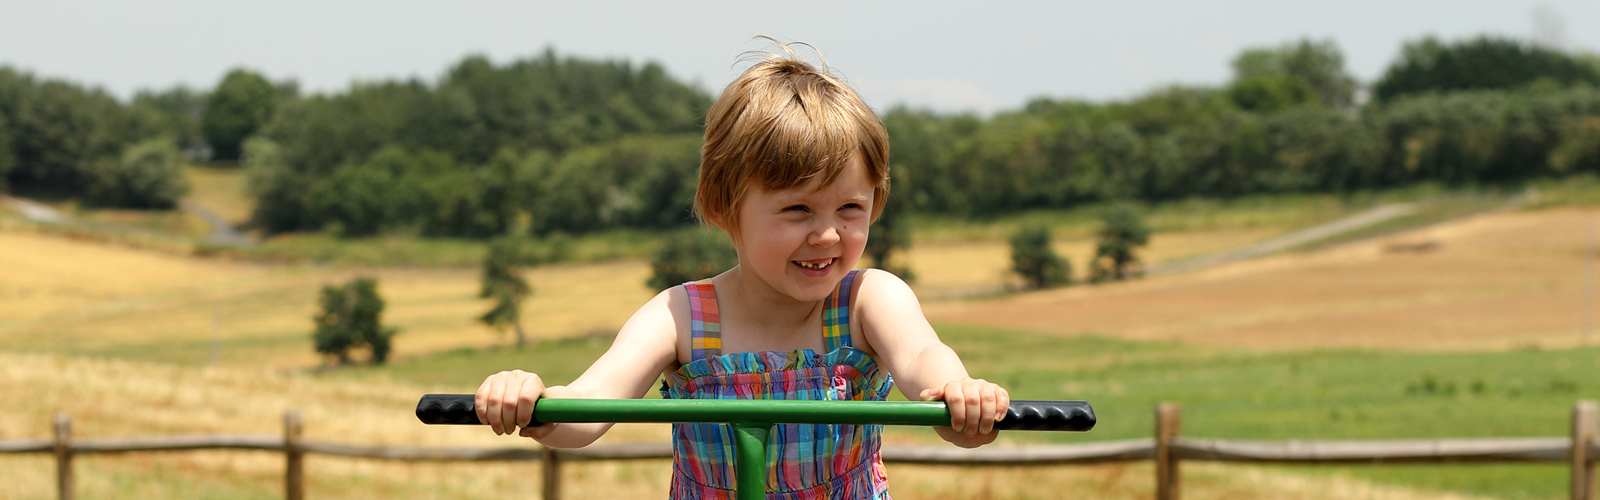 A smiling little girl with short blonde hair rides a tricycle in a rural setting.